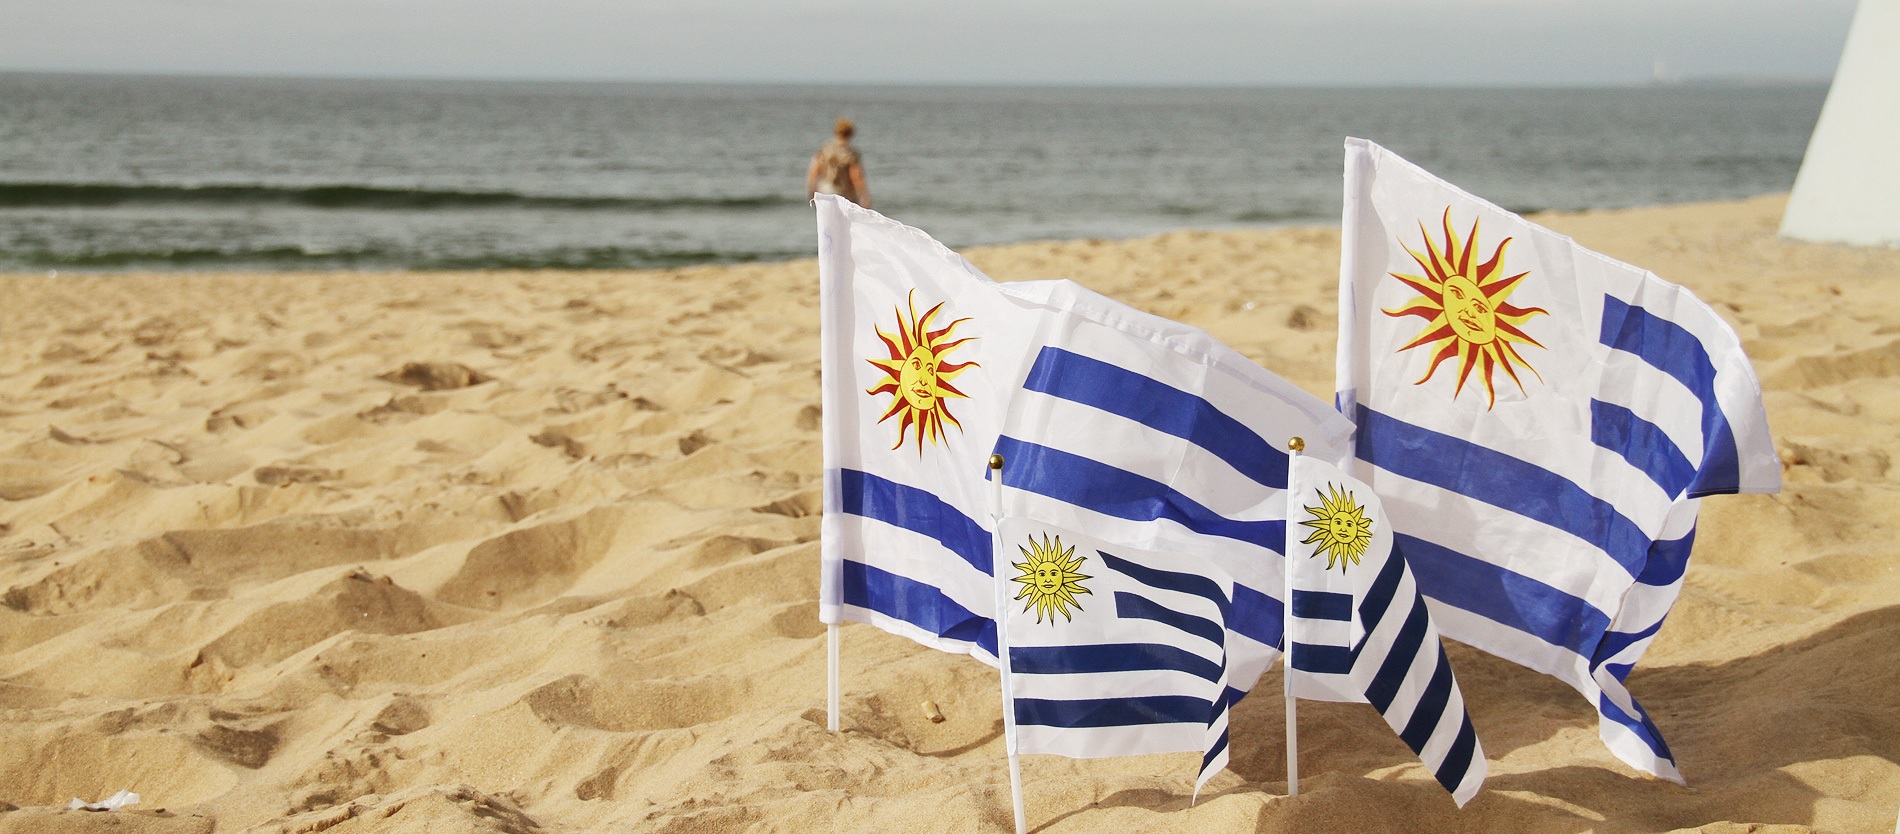 Uruguay ranked first in Latin America and 25th globally in its latest report.